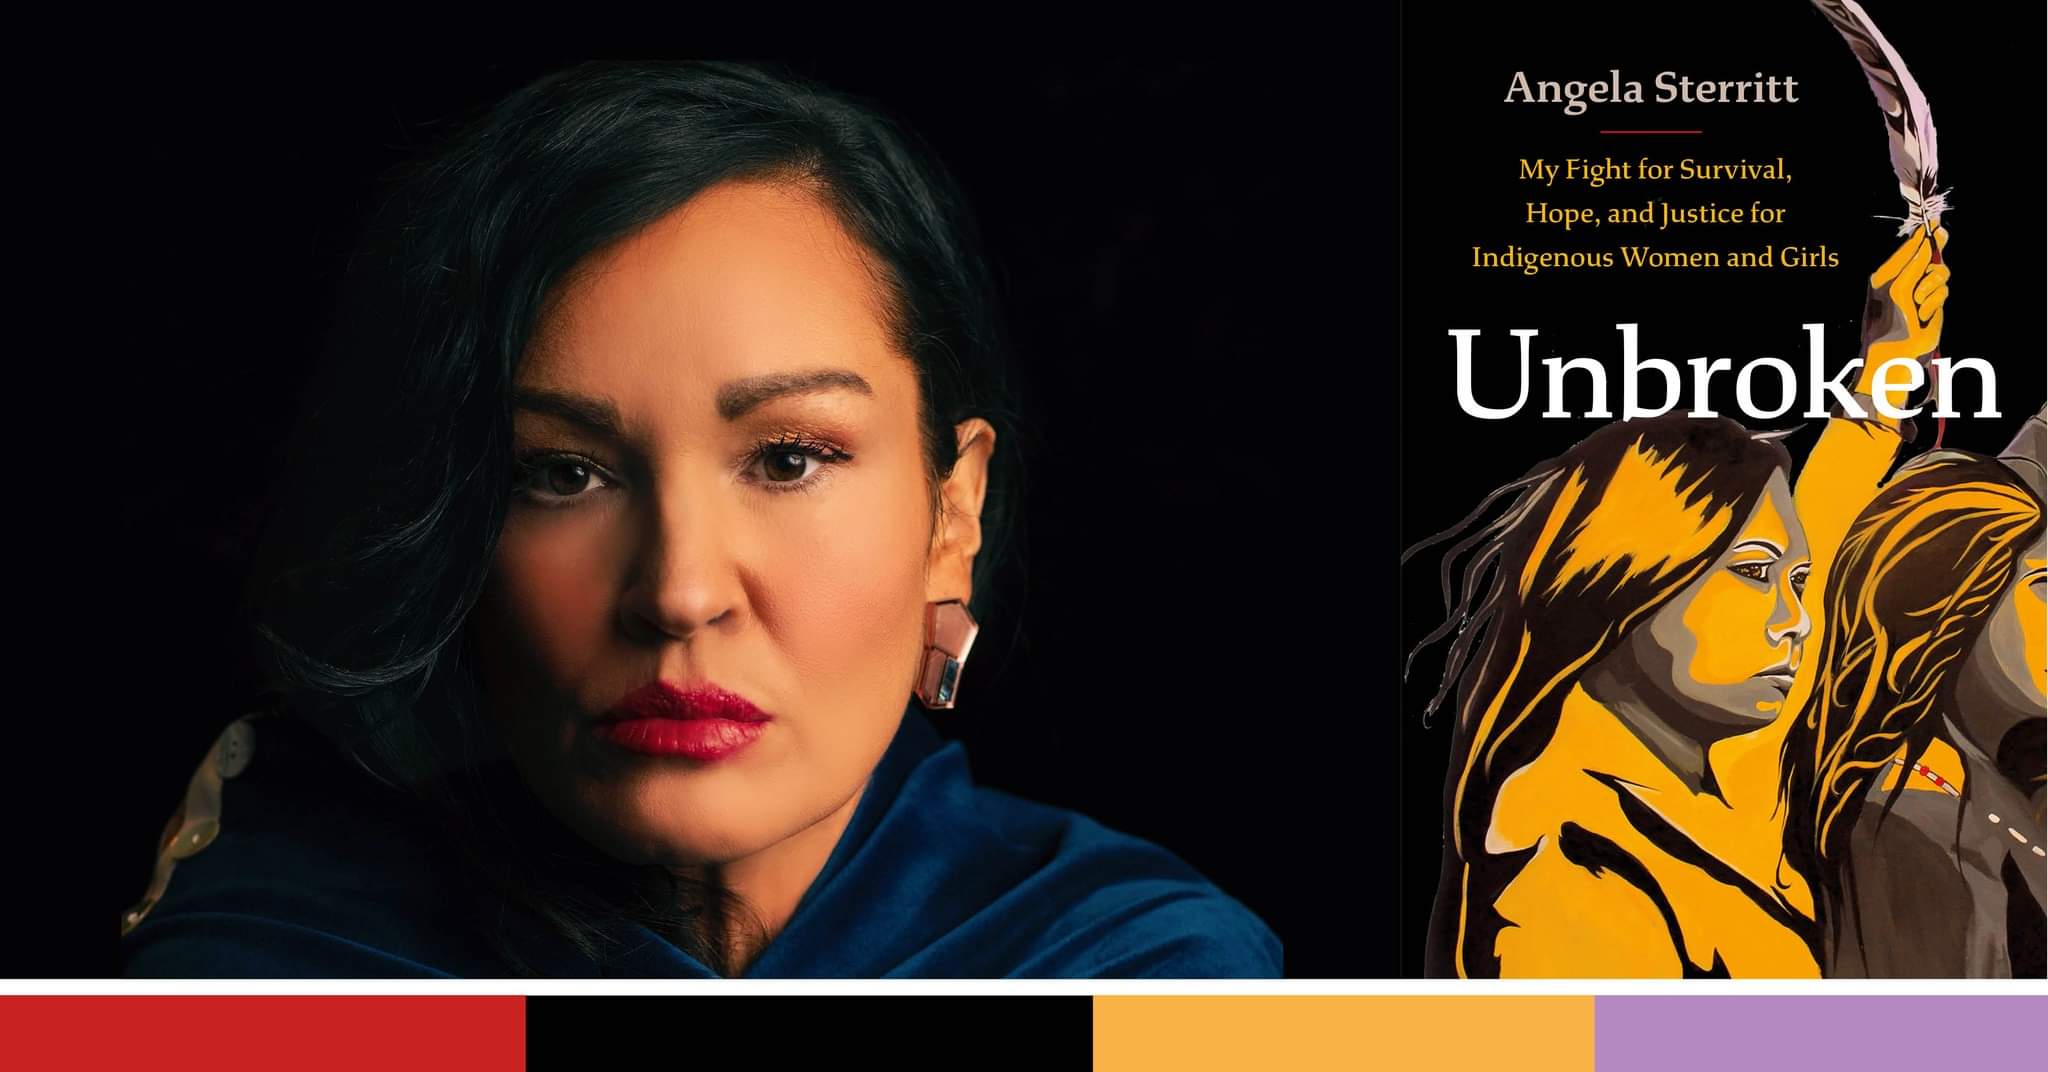 Image of Angela Sterritt and the book cover for Unbroken : My Fight for Survival, Hope and Justice for Indigenous Women and Girls.